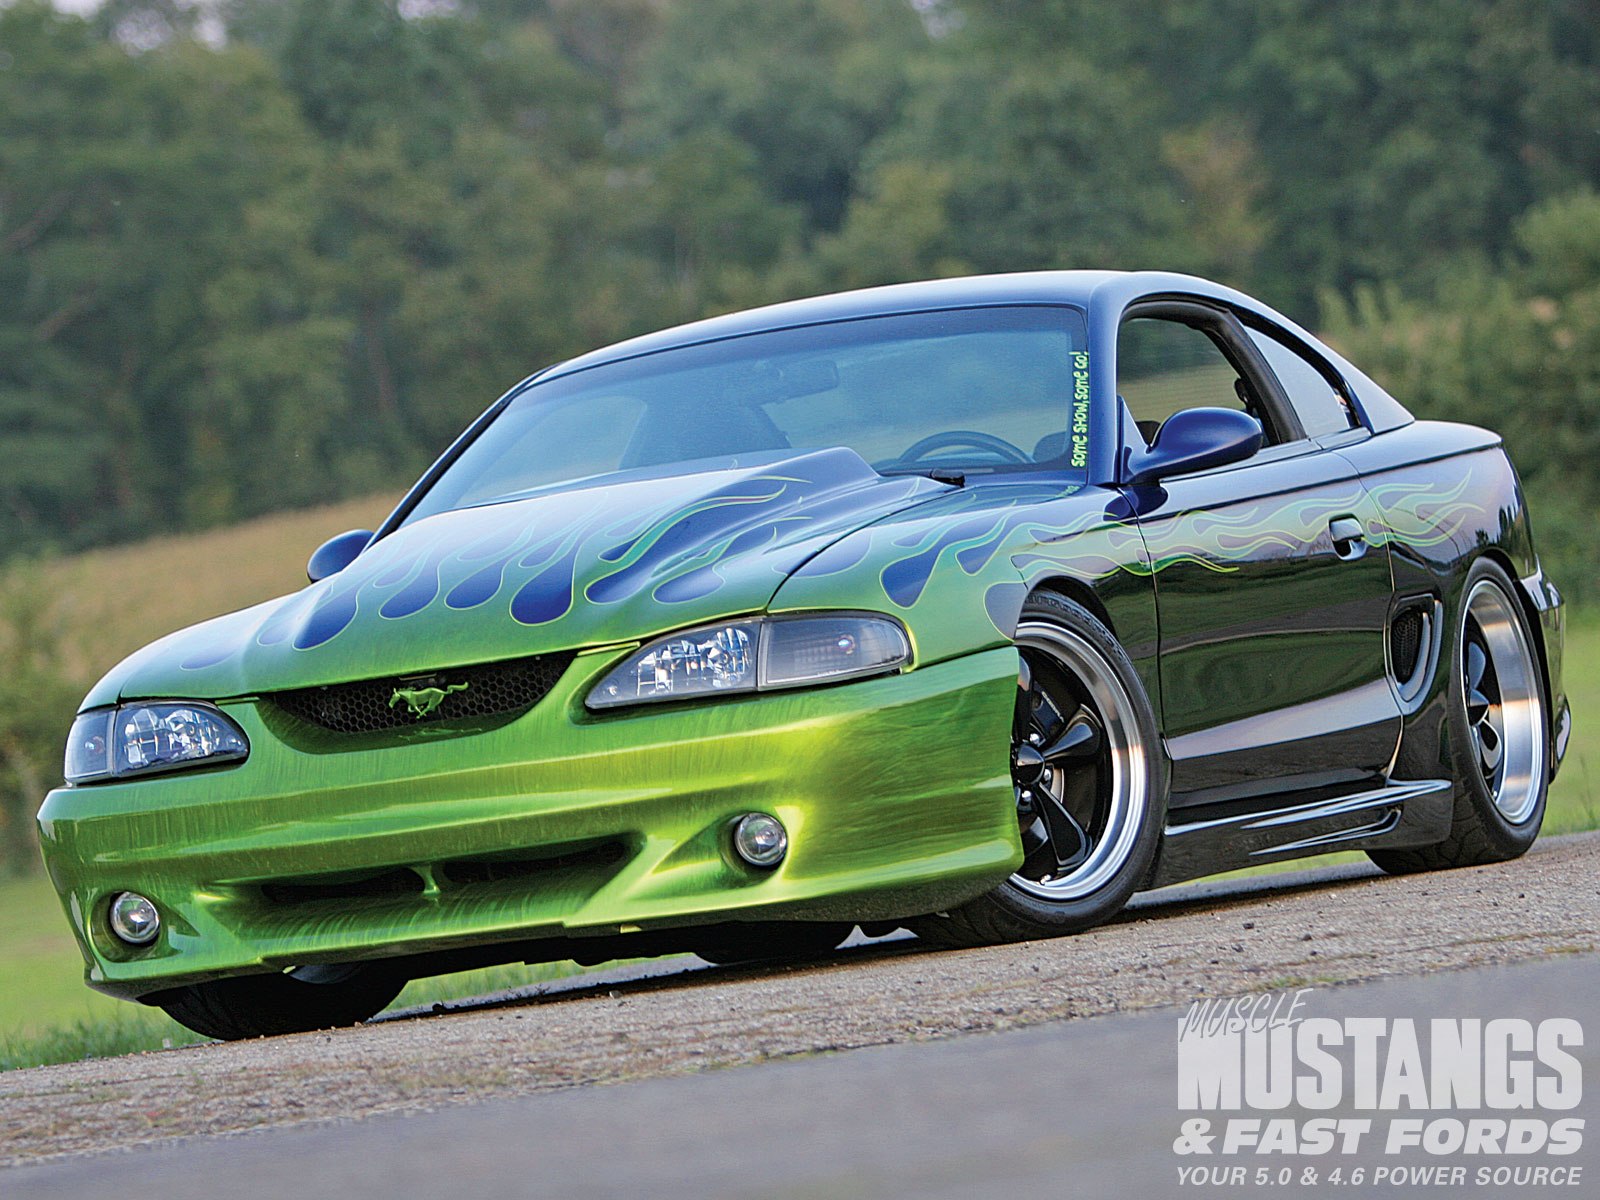 Ford Mustang 1998 #13